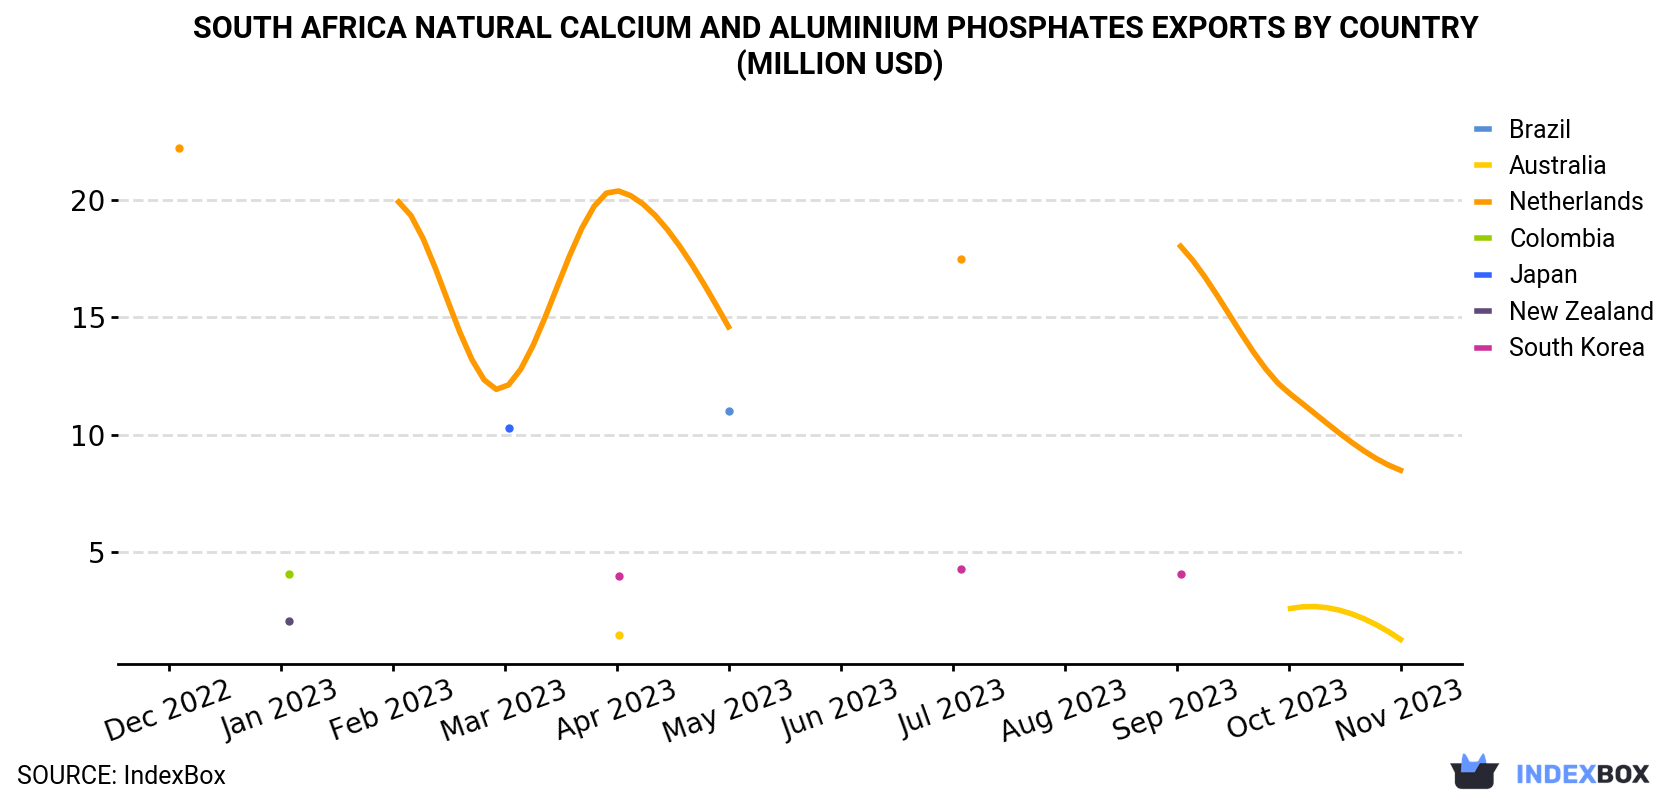 South Africa Natural Calcium And Aluminium Phosphates Exports By Country (Million USD)